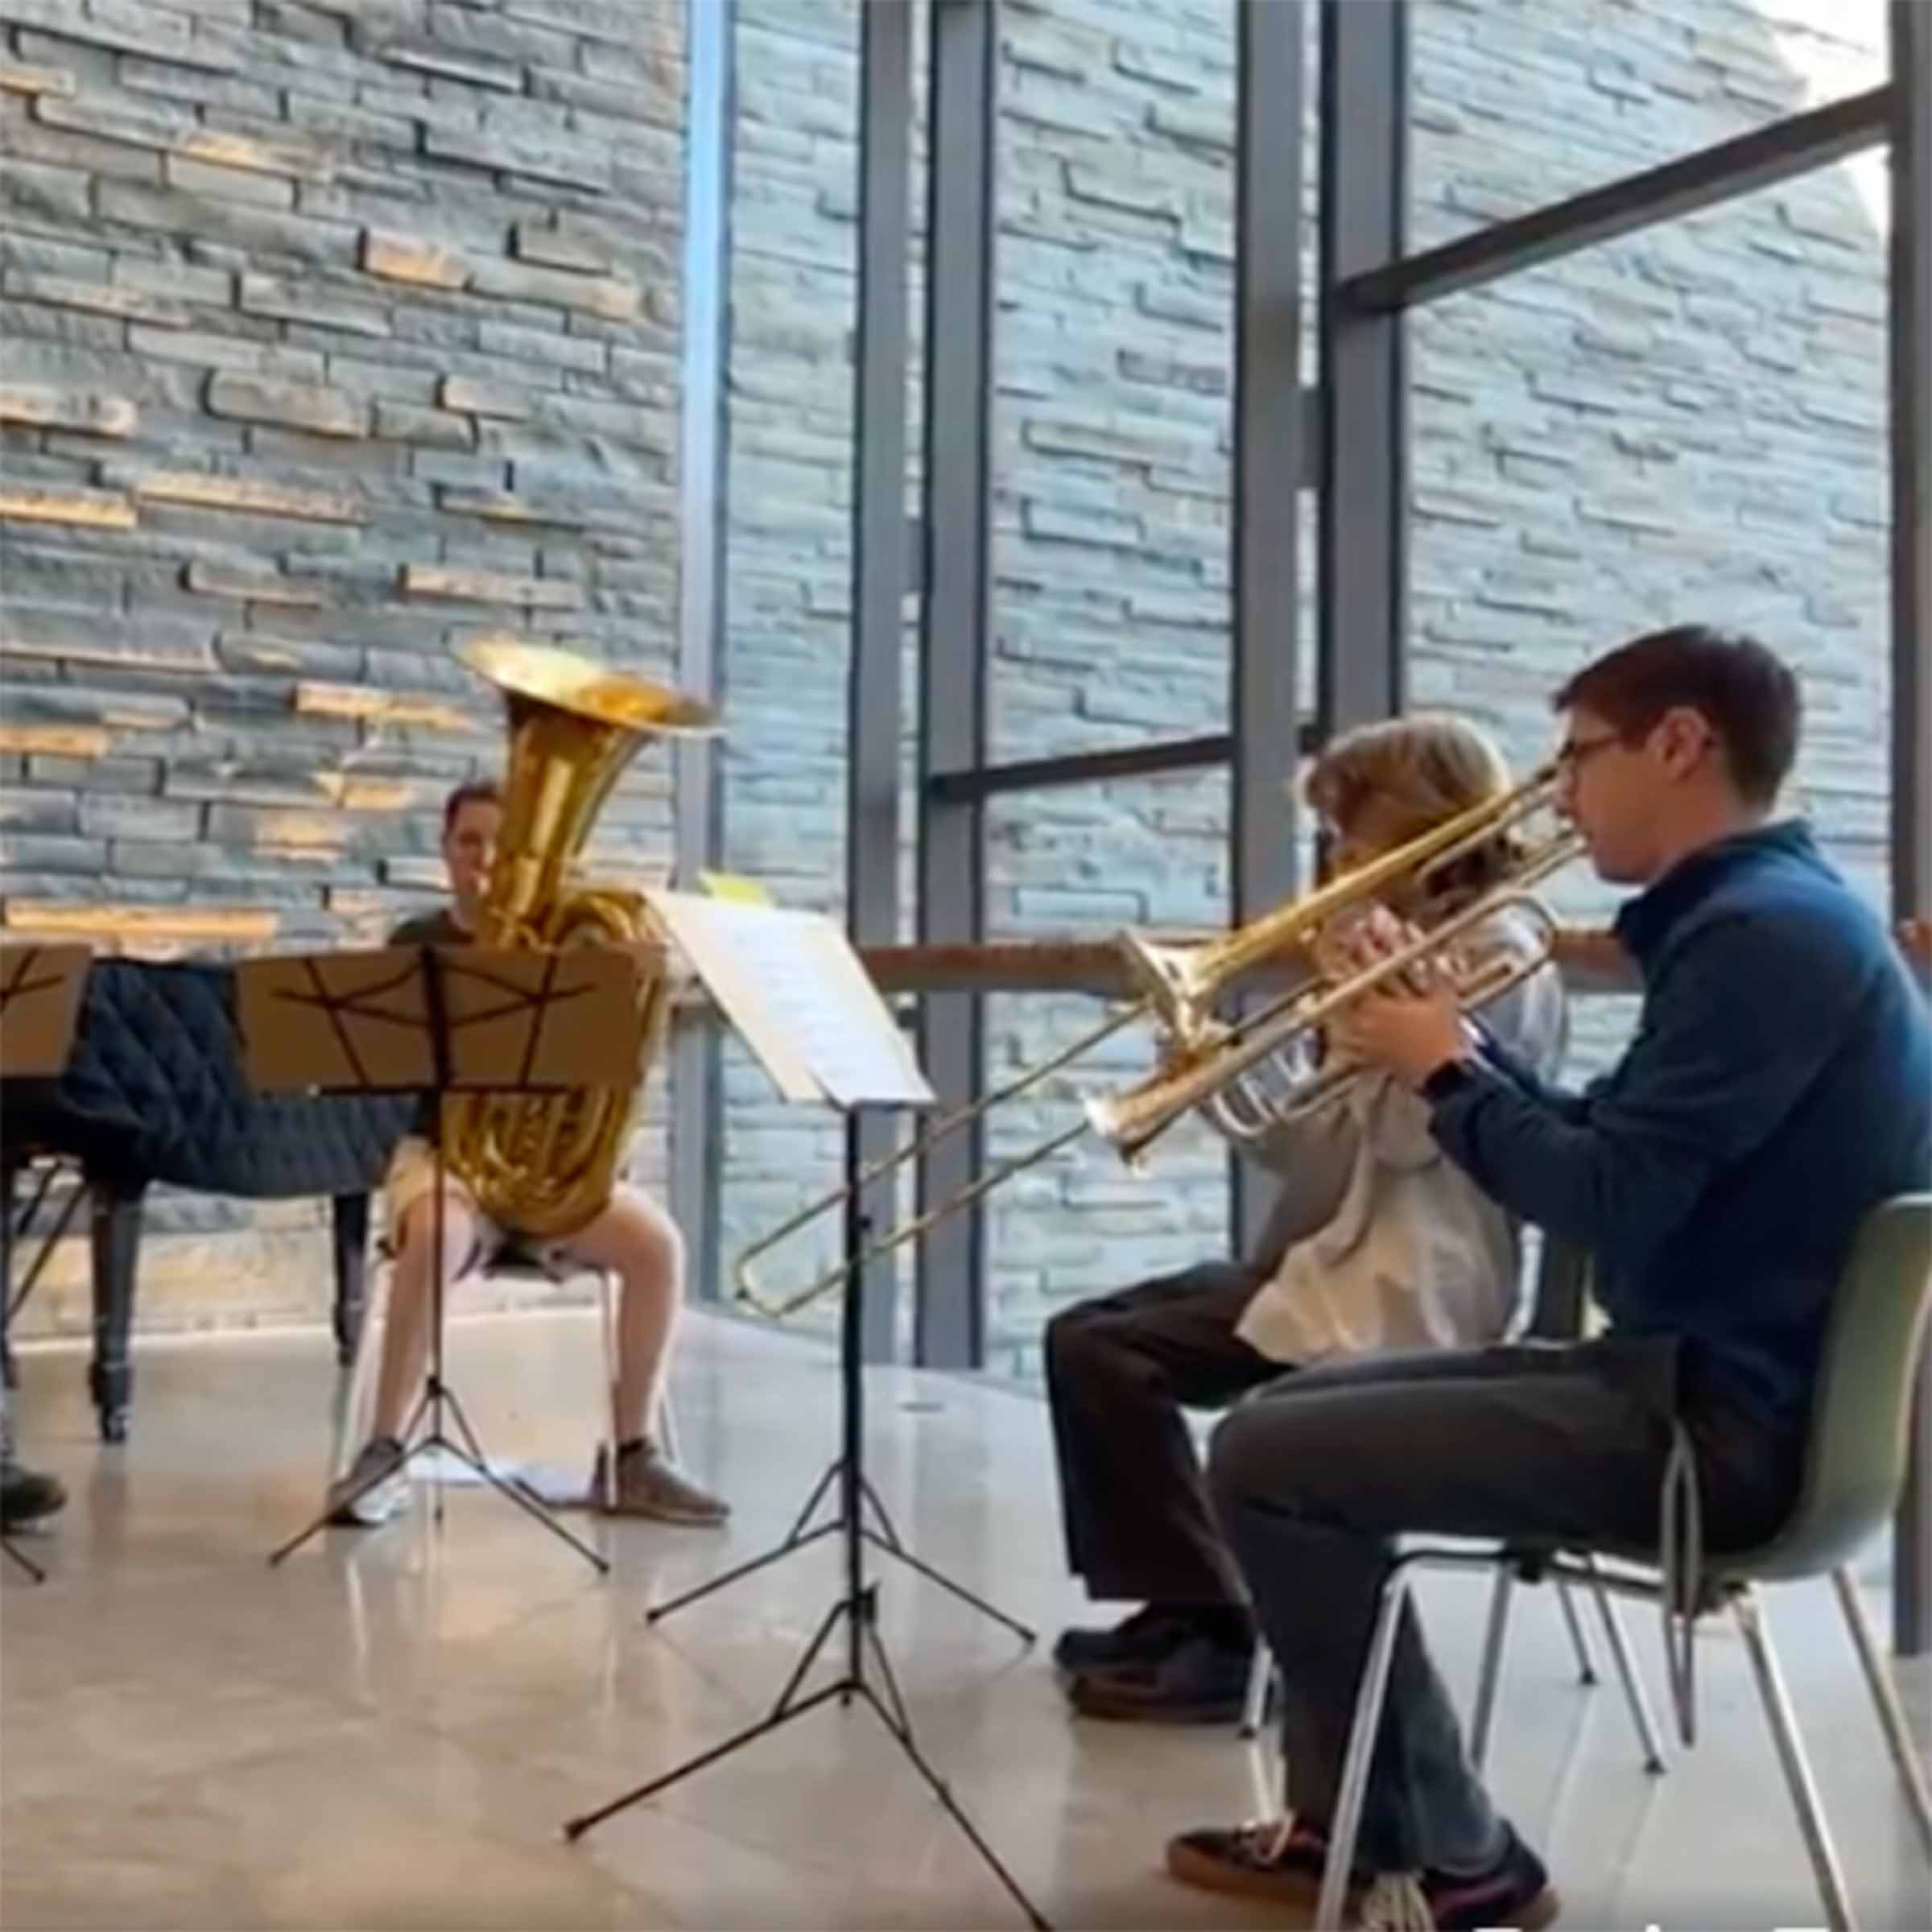 Three musicians playing tuba, trombone and trumpet in a large space